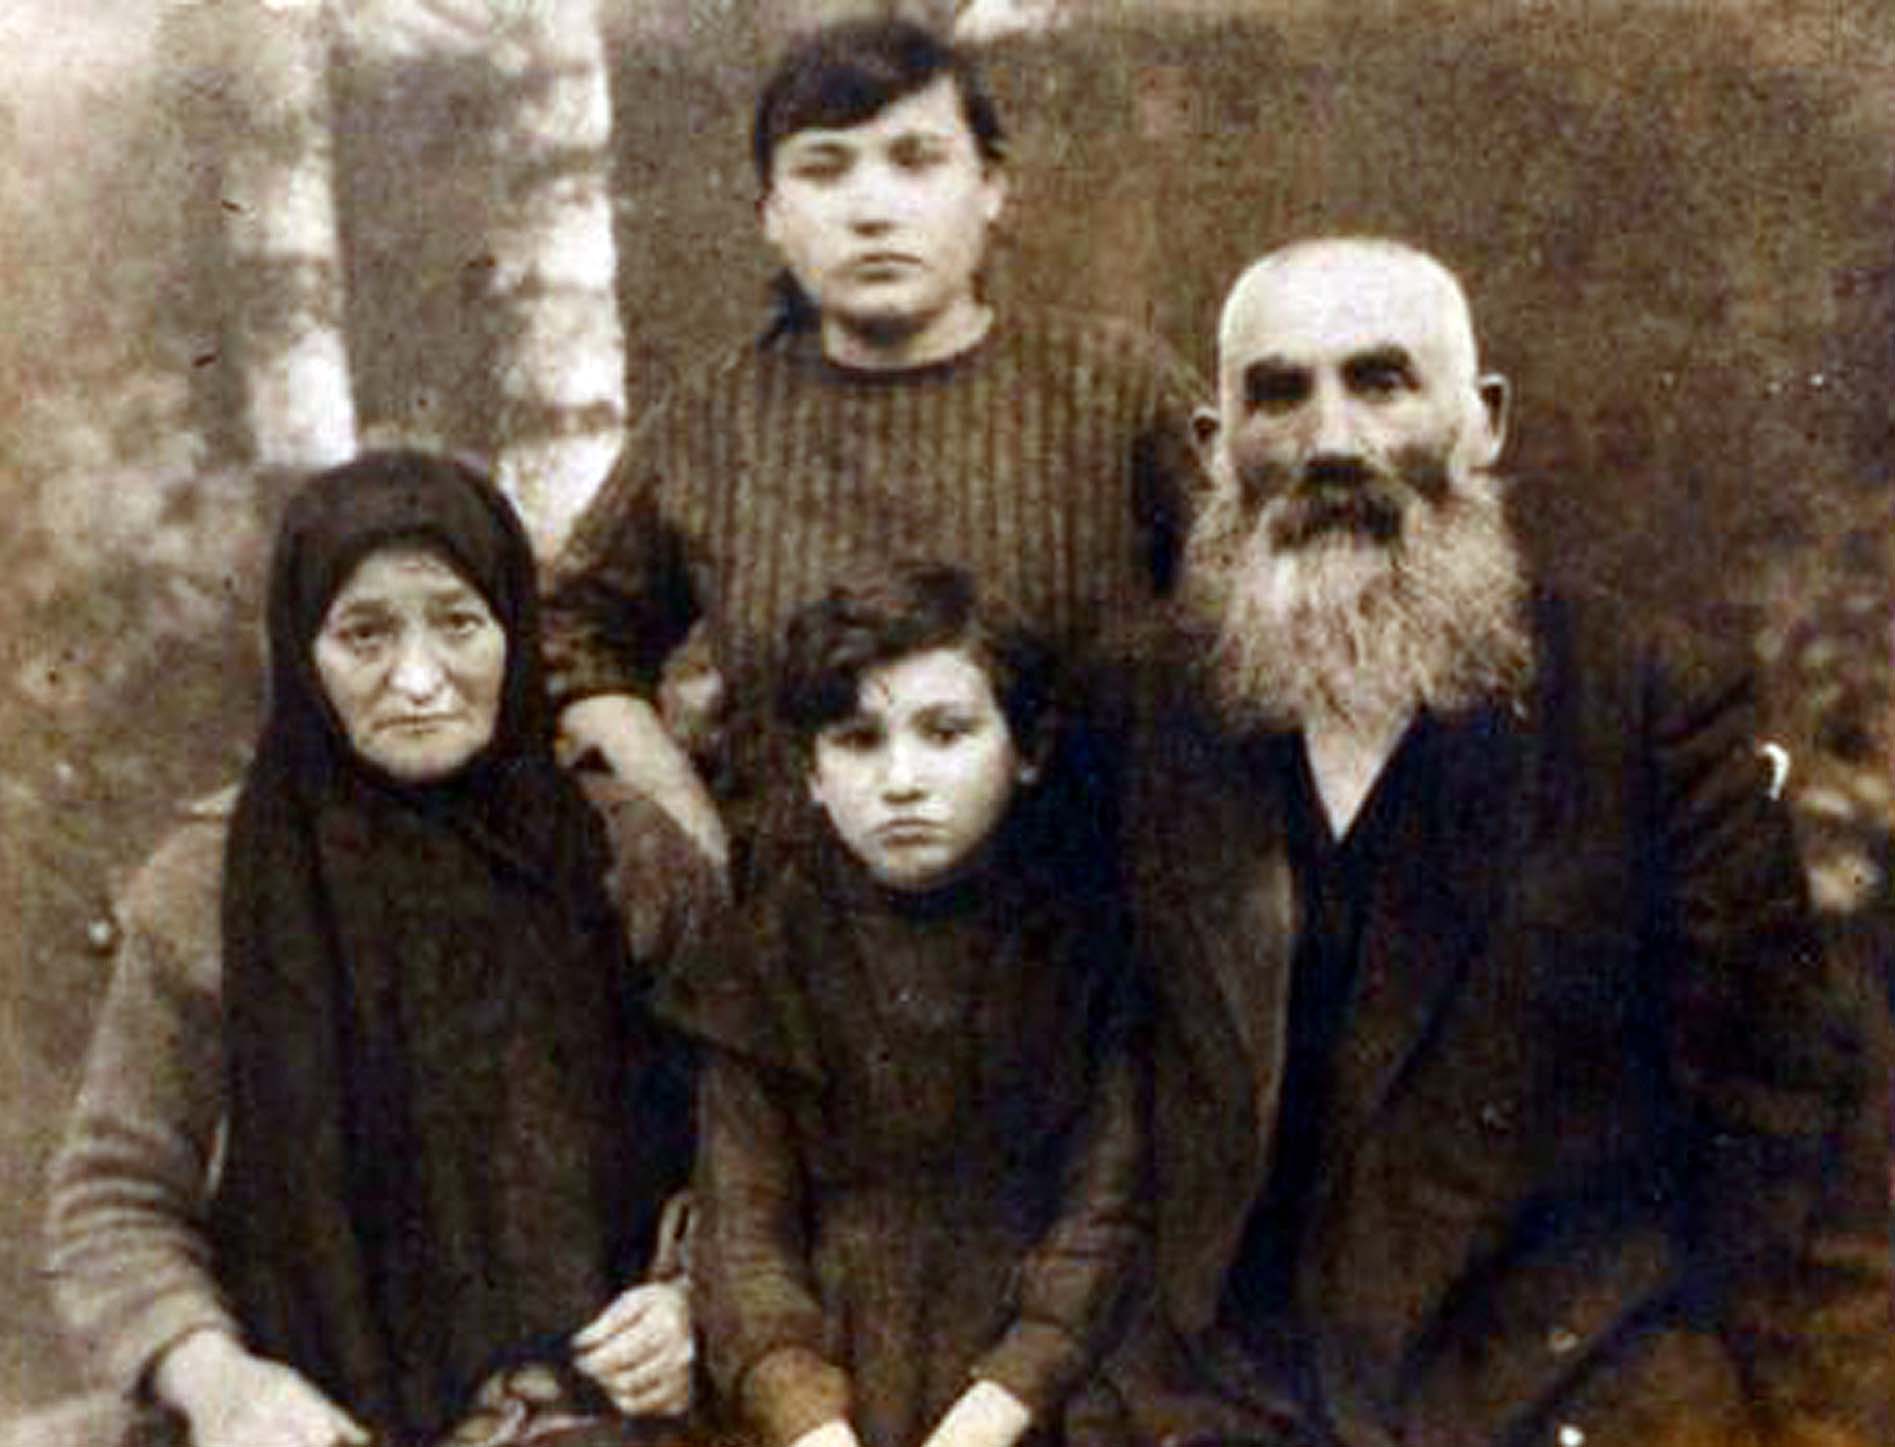 The Eli Lechtzer Family, circa 1915. (L-R, seated) Chana Butzarsky Lechtzer, Raizel (Rose) Lechtzer, Eli Lechtzer, and Golda Lechtzer (standing). Rose was interviewed by the Ellis Island Oral History Project in 1993 and told her story of her memories of Stavisht and her family's immigration to New York. You can listen to her interview from the link on the Stories page of this site. An essay, written by Rose, recalling her life in and escape from Stavisht also can be found on that page. 